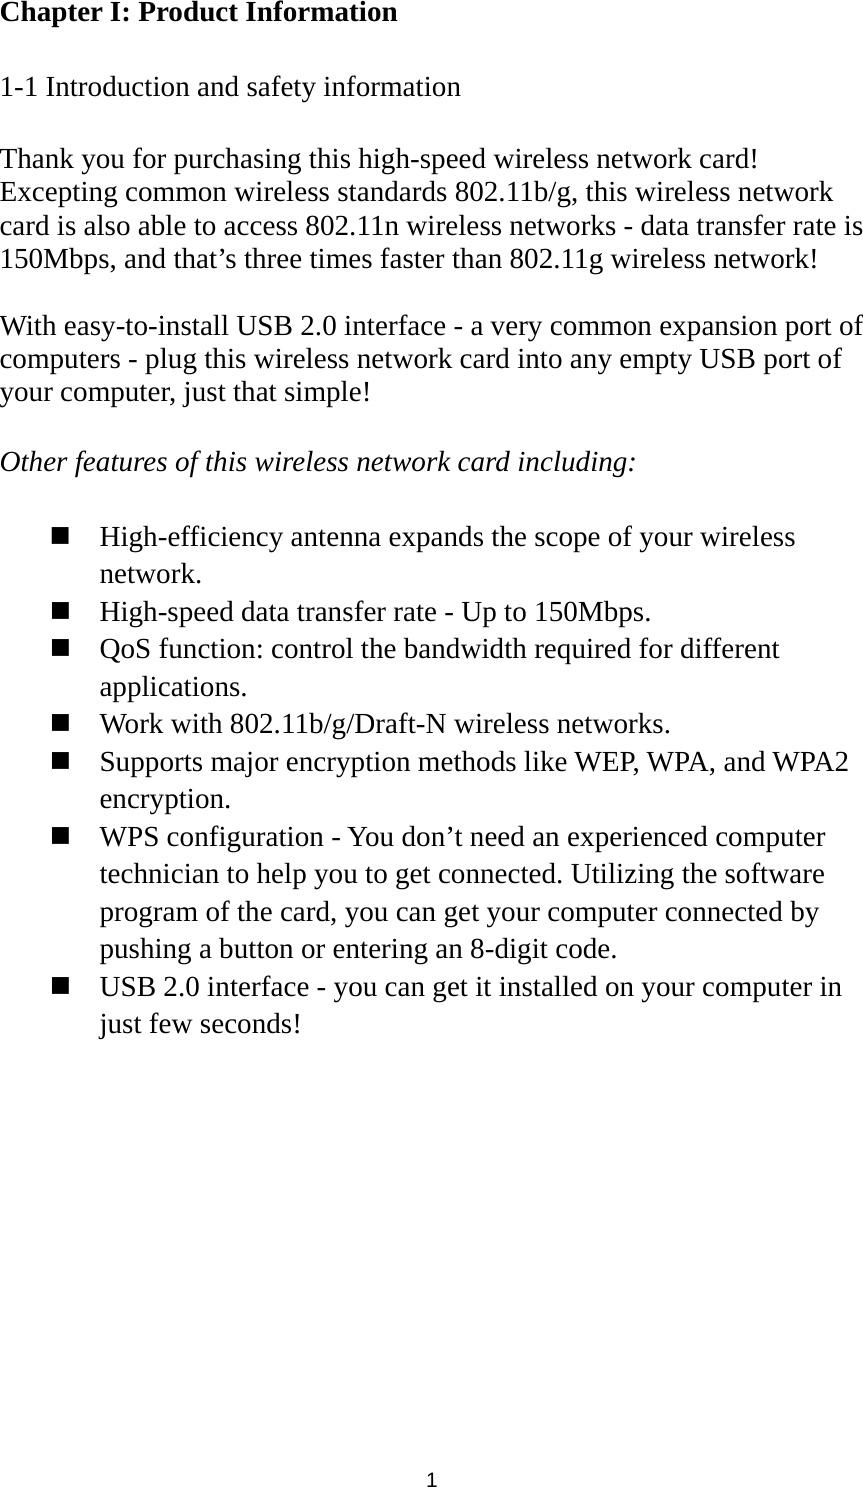  1 Chapter I: Product Information  1-1 Introduction and safety information  Thank you for purchasing this high-speed wireless network card! Excepting common wireless standards 802.11b/g, this wireless network card is also able to access 802.11n wireless networks - data transfer rate is 150Mbps, and that’s three times faster than 802.11g wireless network!    With easy-to-install USB 2.0 interface - a very common expansion port of computers - plug this wireless network card into any empty USB port of your computer, just that simple!  Other features of this wireless network card including:   High-efficiency antenna expands the scope of your wireless network.  High-speed data transfer rate - Up to 150Mbps.  QoS function: control the bandwidth required for different applications.  Work with 802.11b/g/Draft-N wireless networks.  Supports major encryption methods like WEP, WPA, and WPA2 encryption.  WPS configuration - You don’t need an experienced computer technician to help you to get connected. Utilizing the software program of the card, you can get your computer connected by pushing a button or entering an 8-digit code.  USB 2.0 interface - you can get it installed on your computer in just few seconds! 